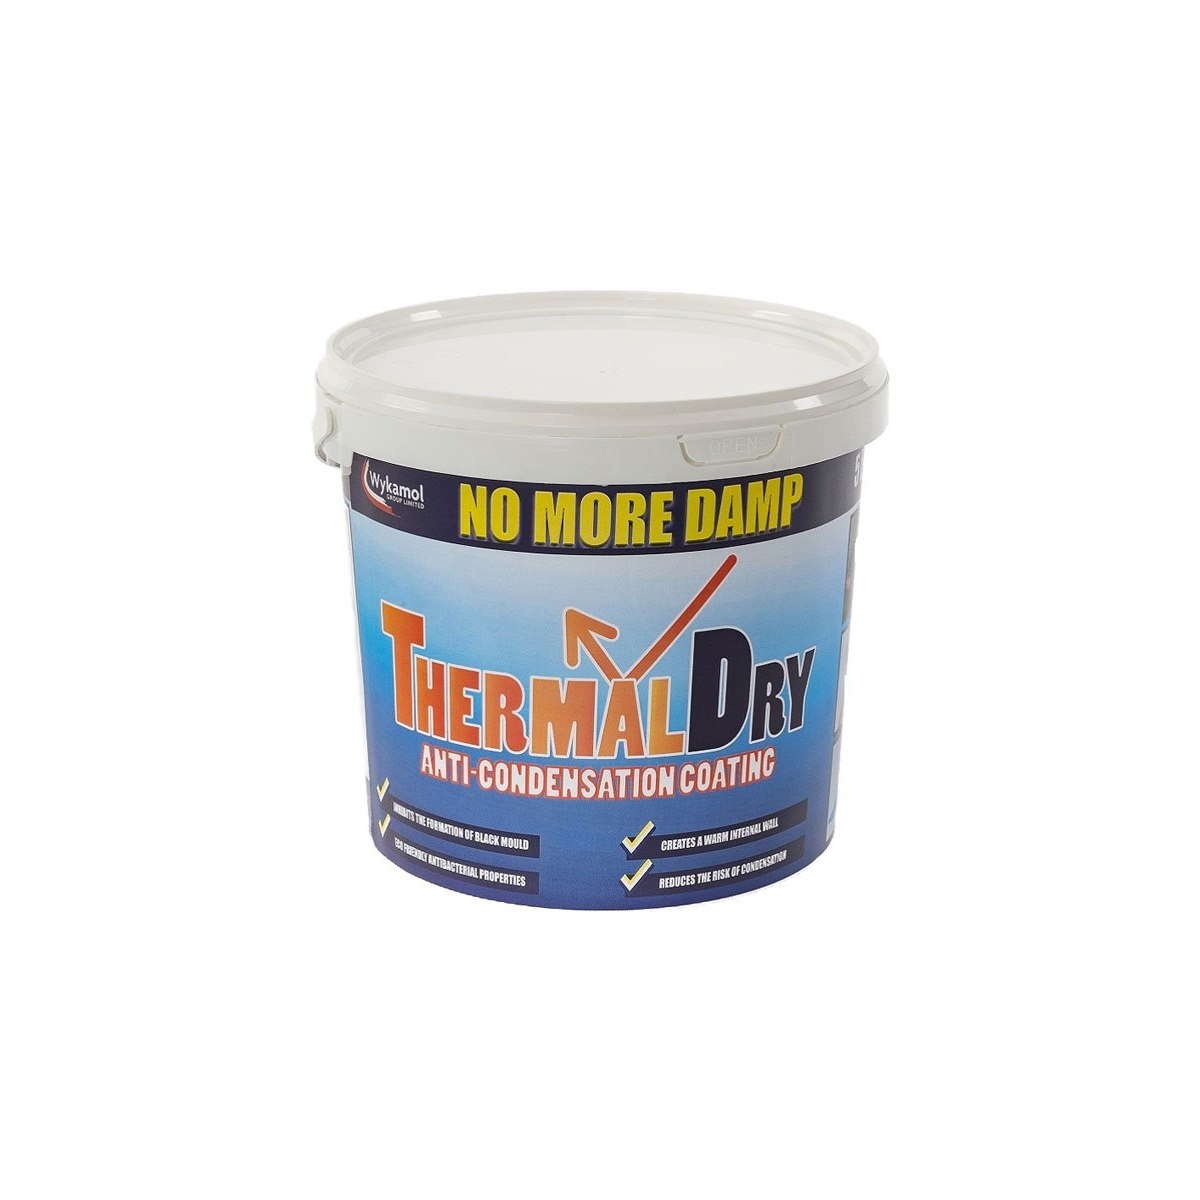 Wykamol Thermaldry Anti-Condensation Coating Paint White 5 Litre